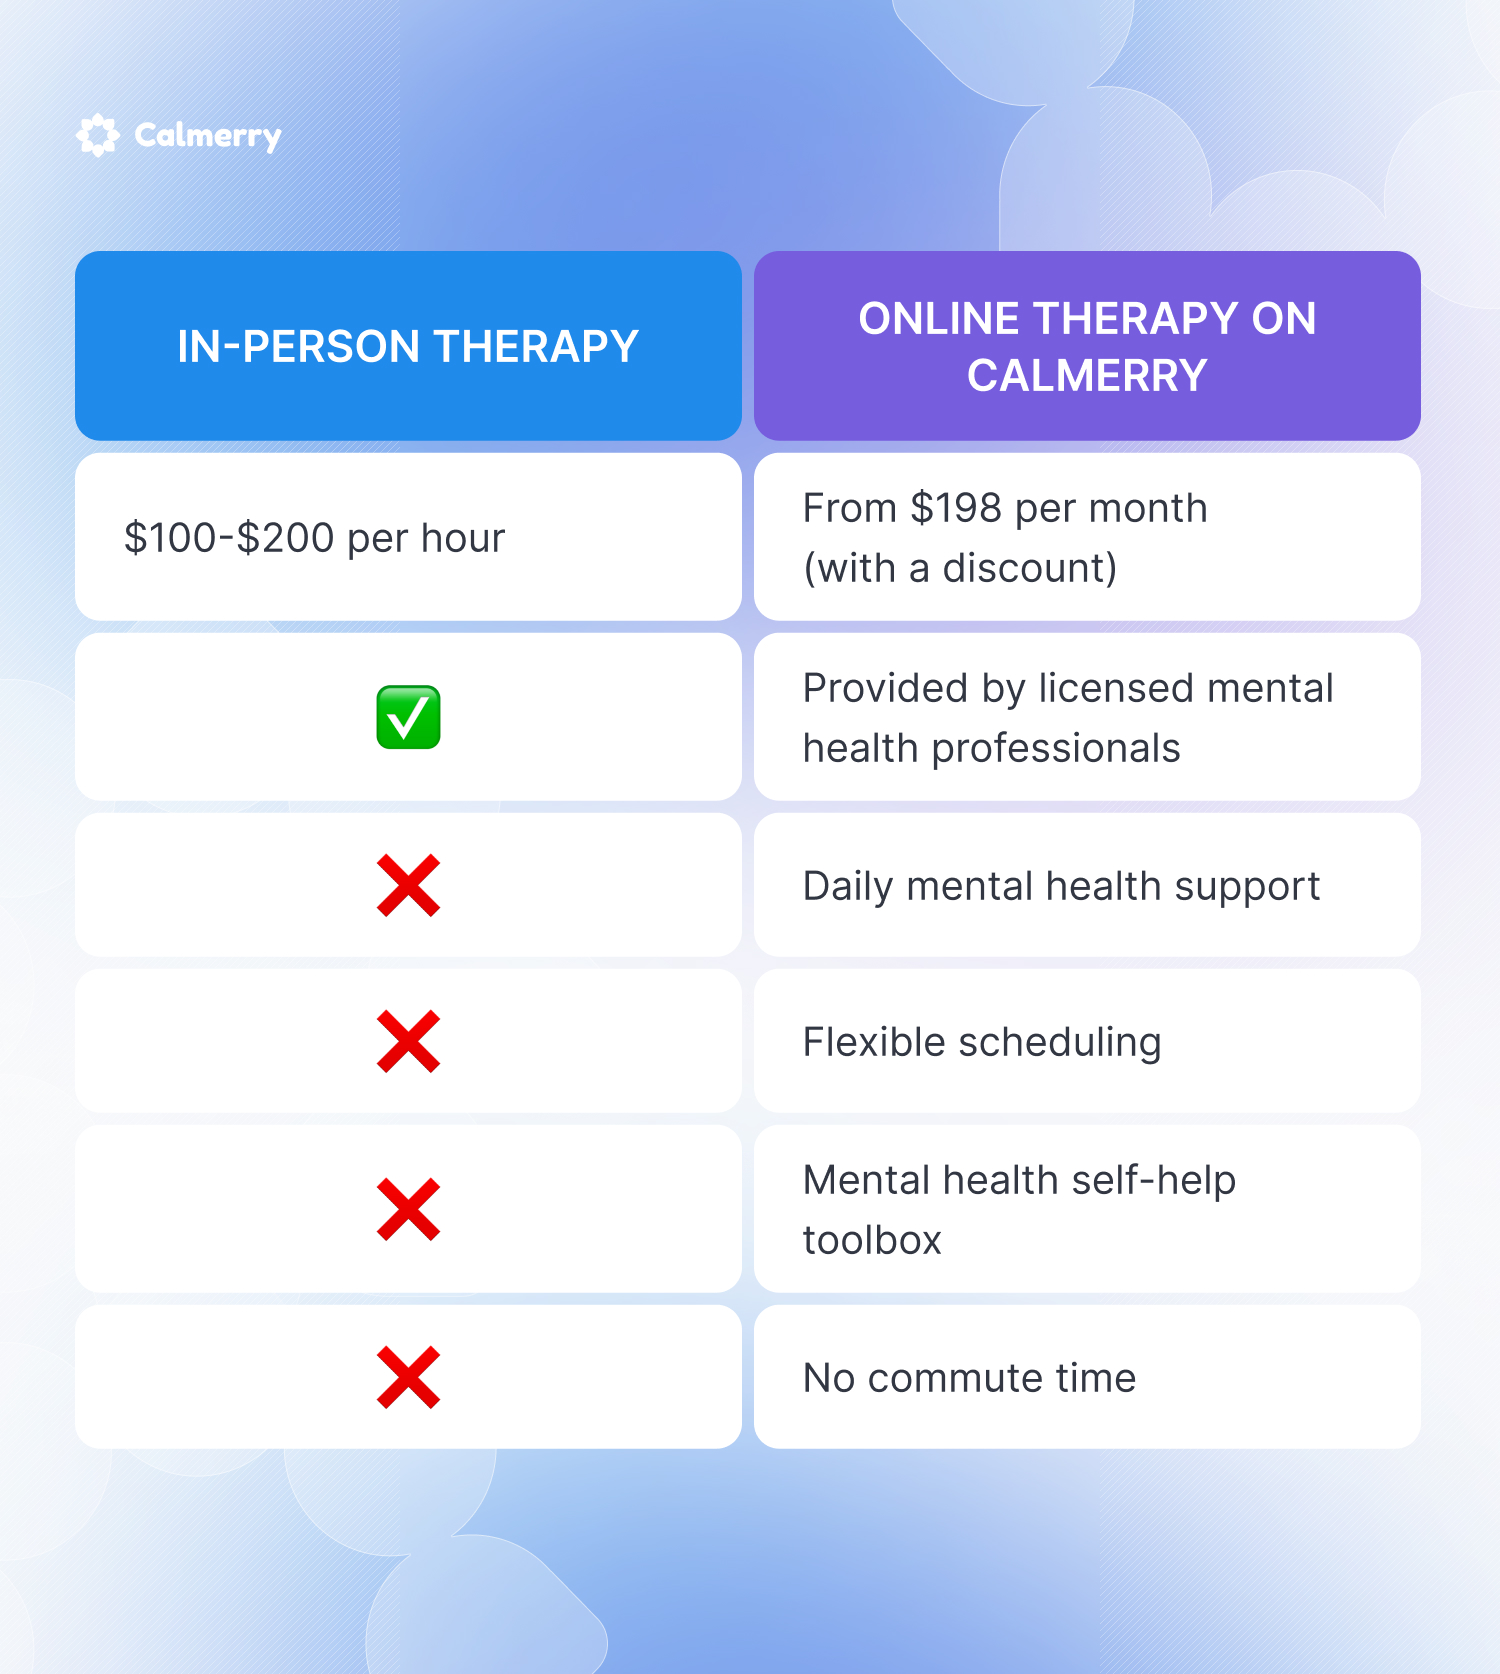 In-person therapy
Online therapy on Calmerry
$100-$200 per hour
From $198 per month (with a discount)
✅
Provided by licensed mental health professionals	
❌
Daily mental health support	
❌
Flexible scheduling	
❌
Mental health self-help toolbox	
❌
No commute time
